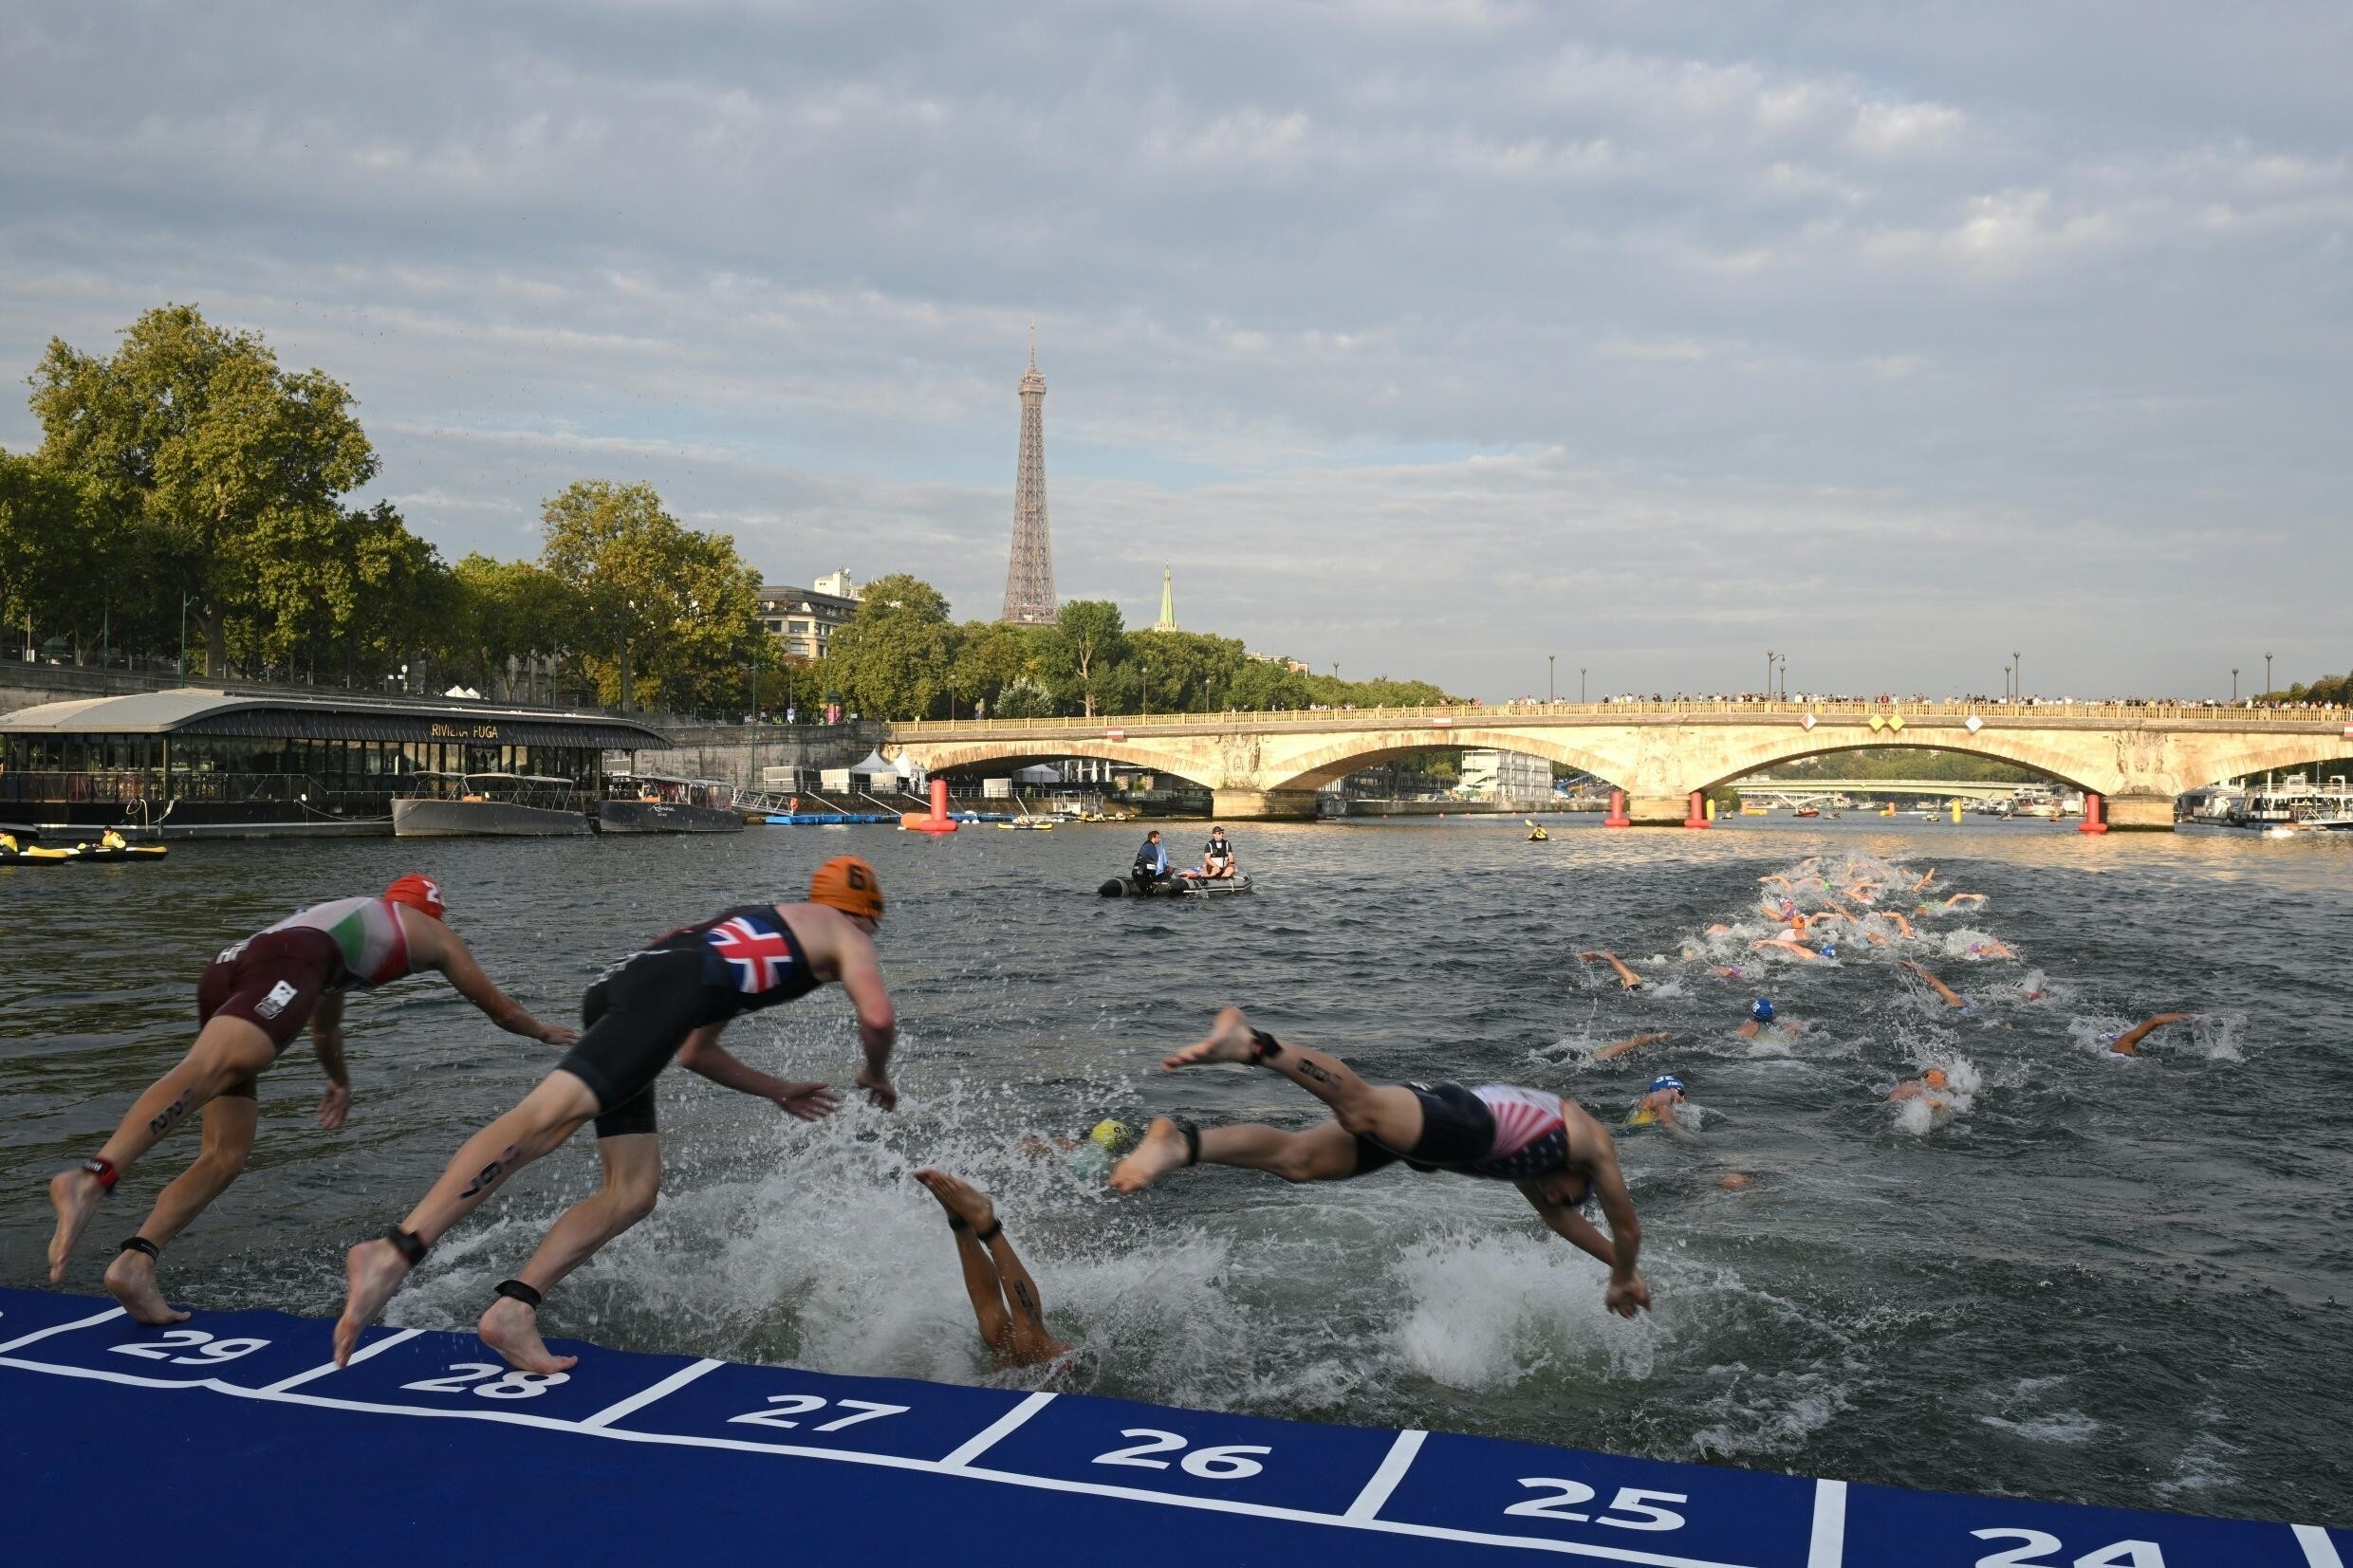 Will the Seine be clean enough to swim in?